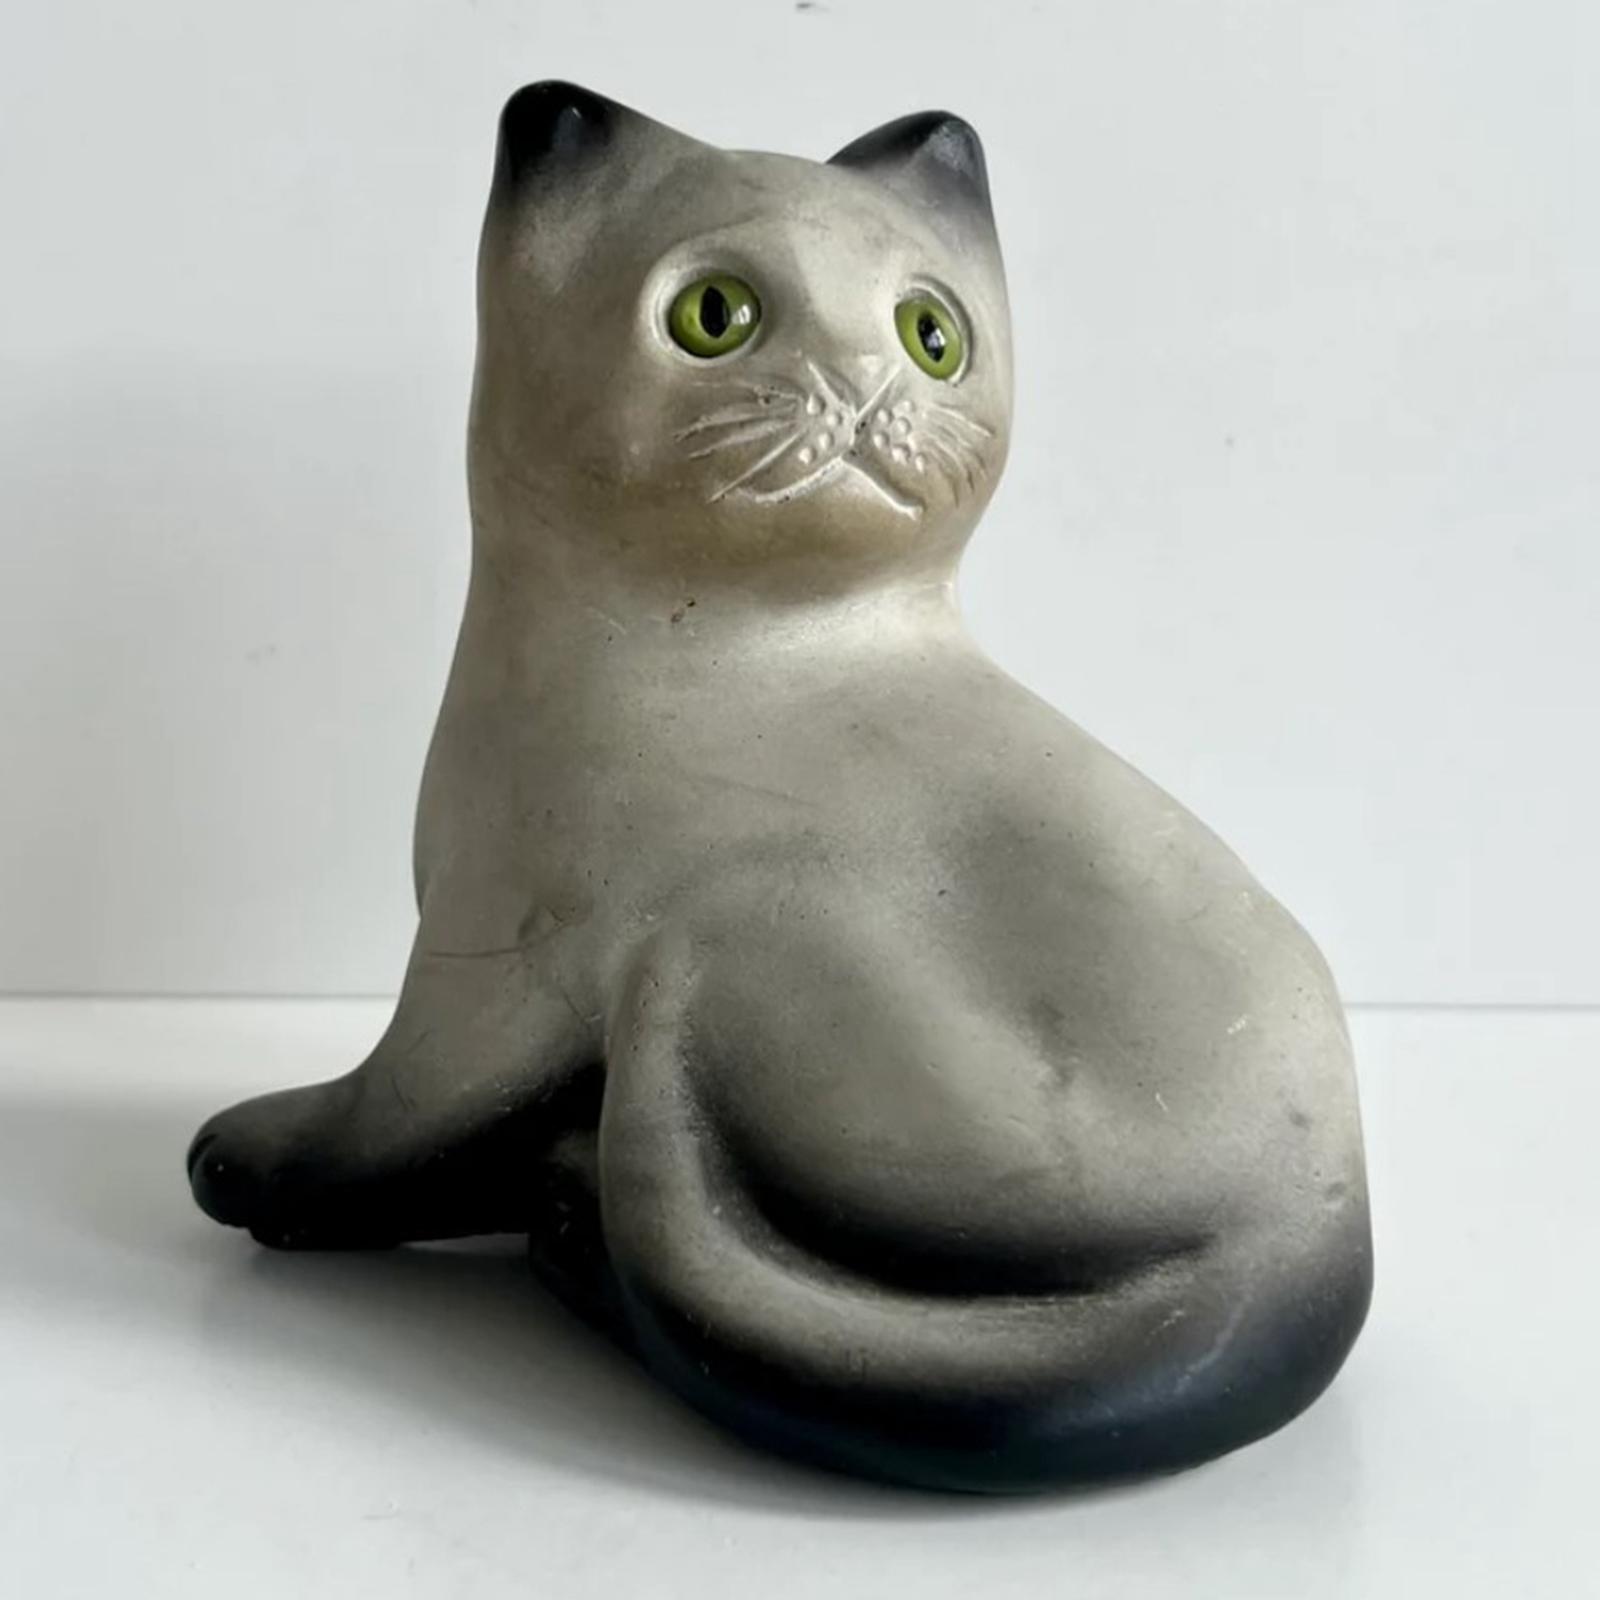 Cat Statue Resin Ornament Art Figurine for Outside Balcony Table Centerpiece